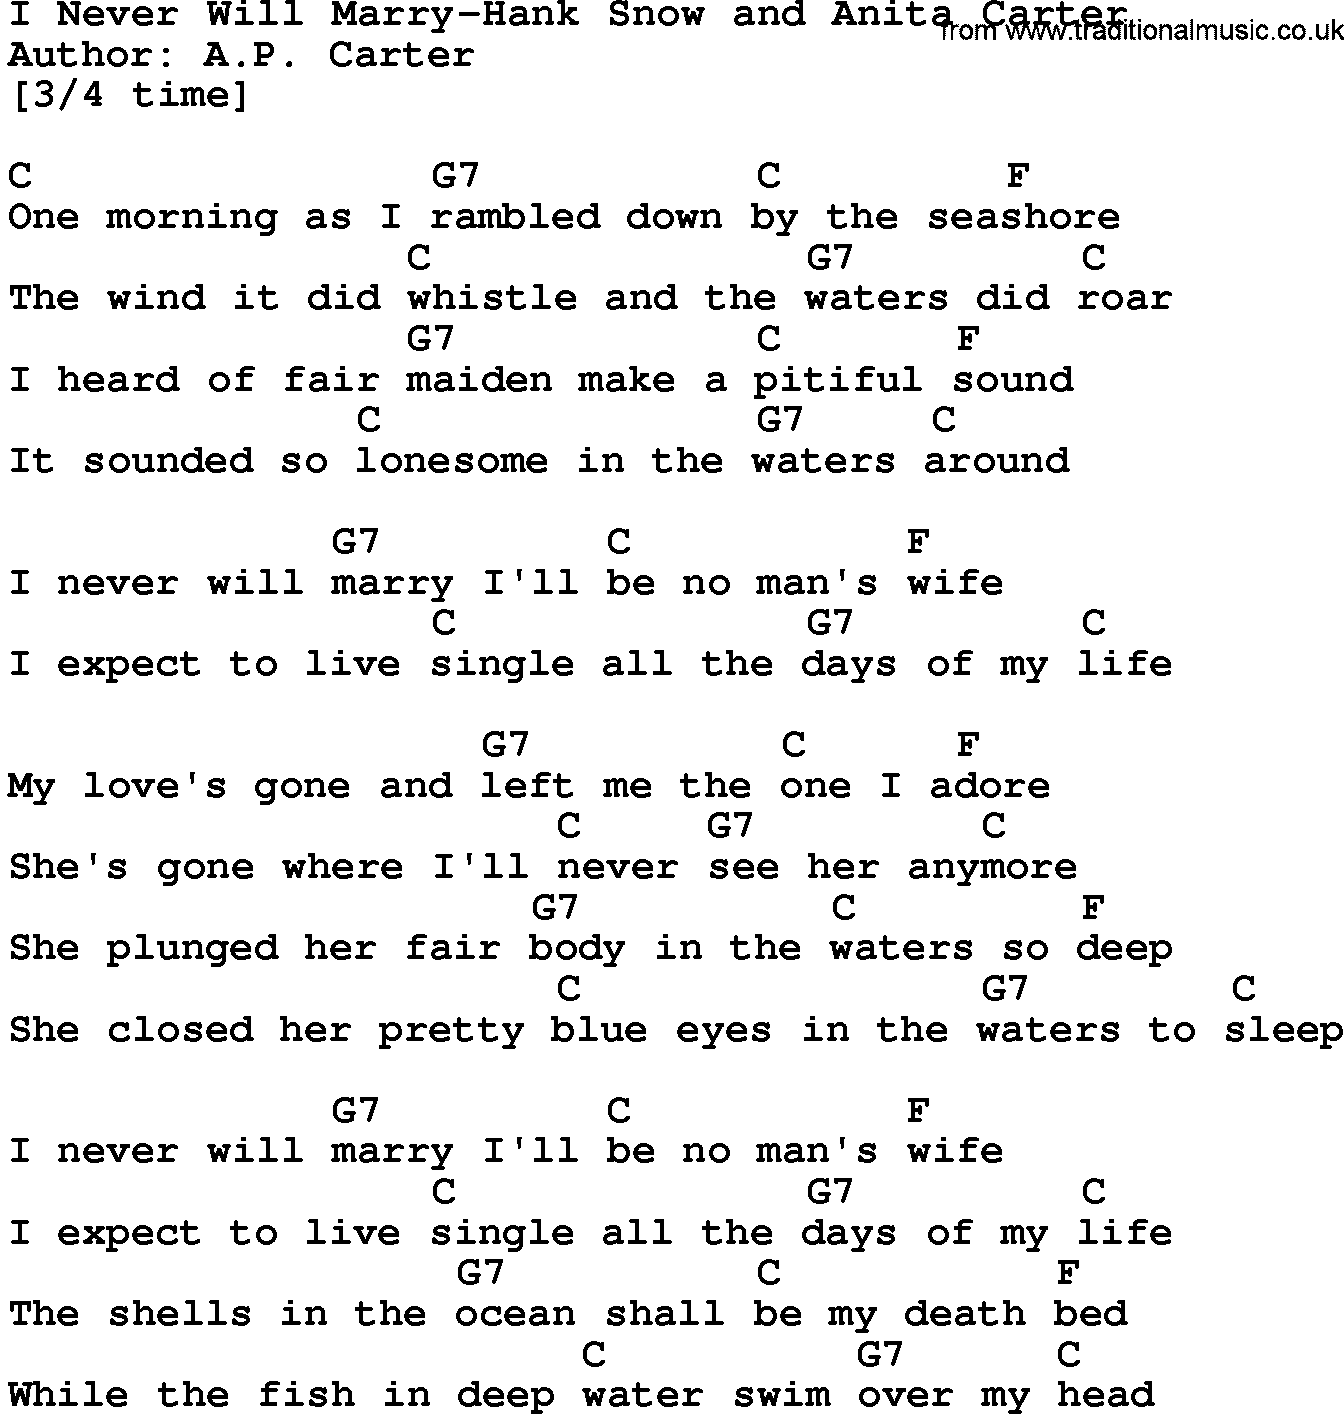 Country music song: I Never Will Marry-Hank Snow And Anita Carter lyrics and chords